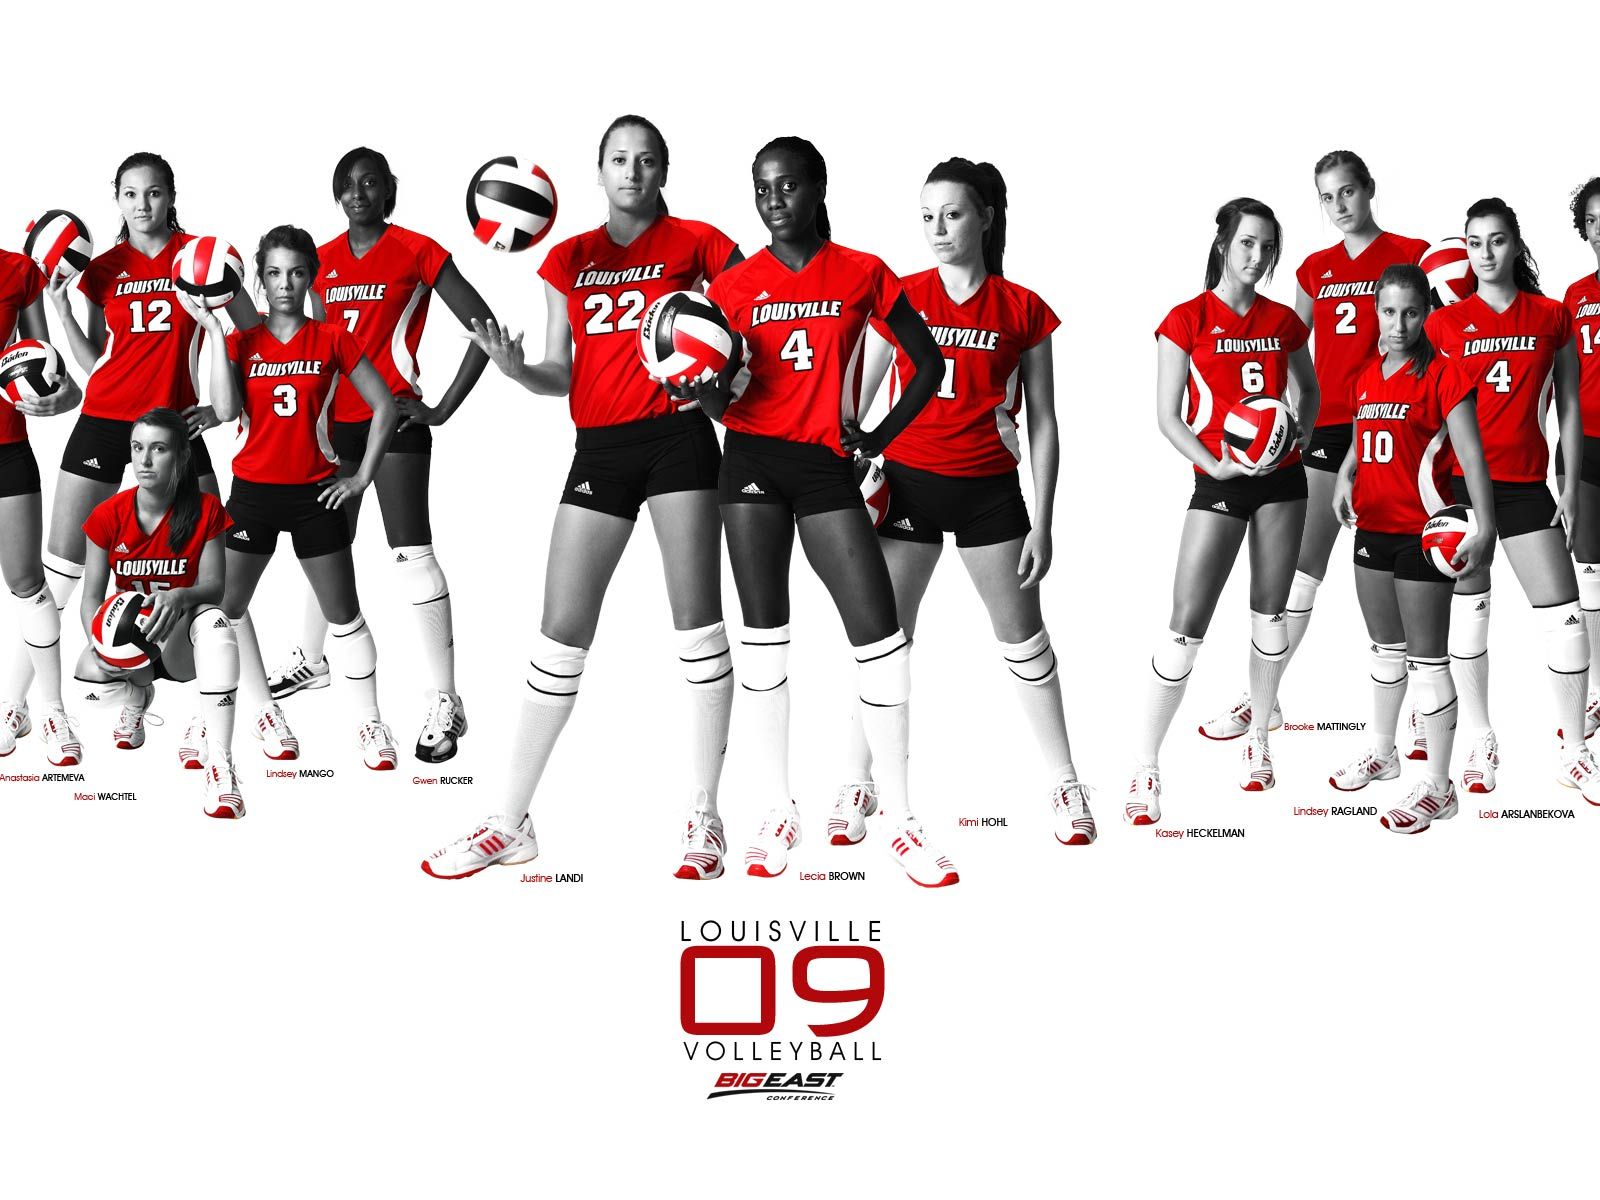 Louisville Volleyball Women Team Big East Conference 1600x1200 DESKTOP Beach Volleyball and Volleyball